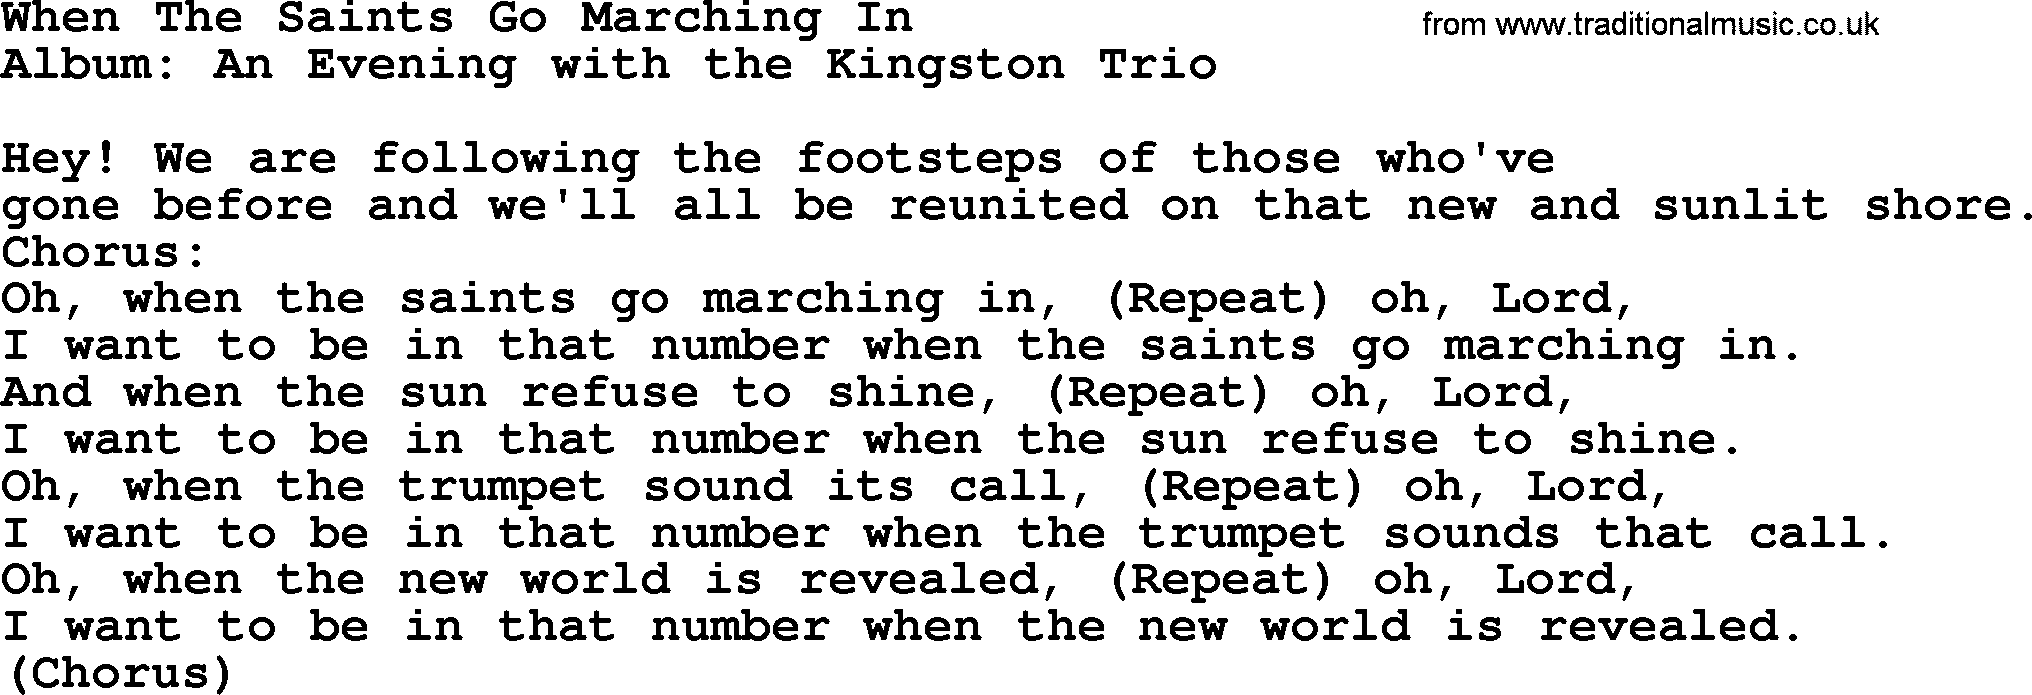 Kingston Trio song When The Saints Go Marching In, lyrics